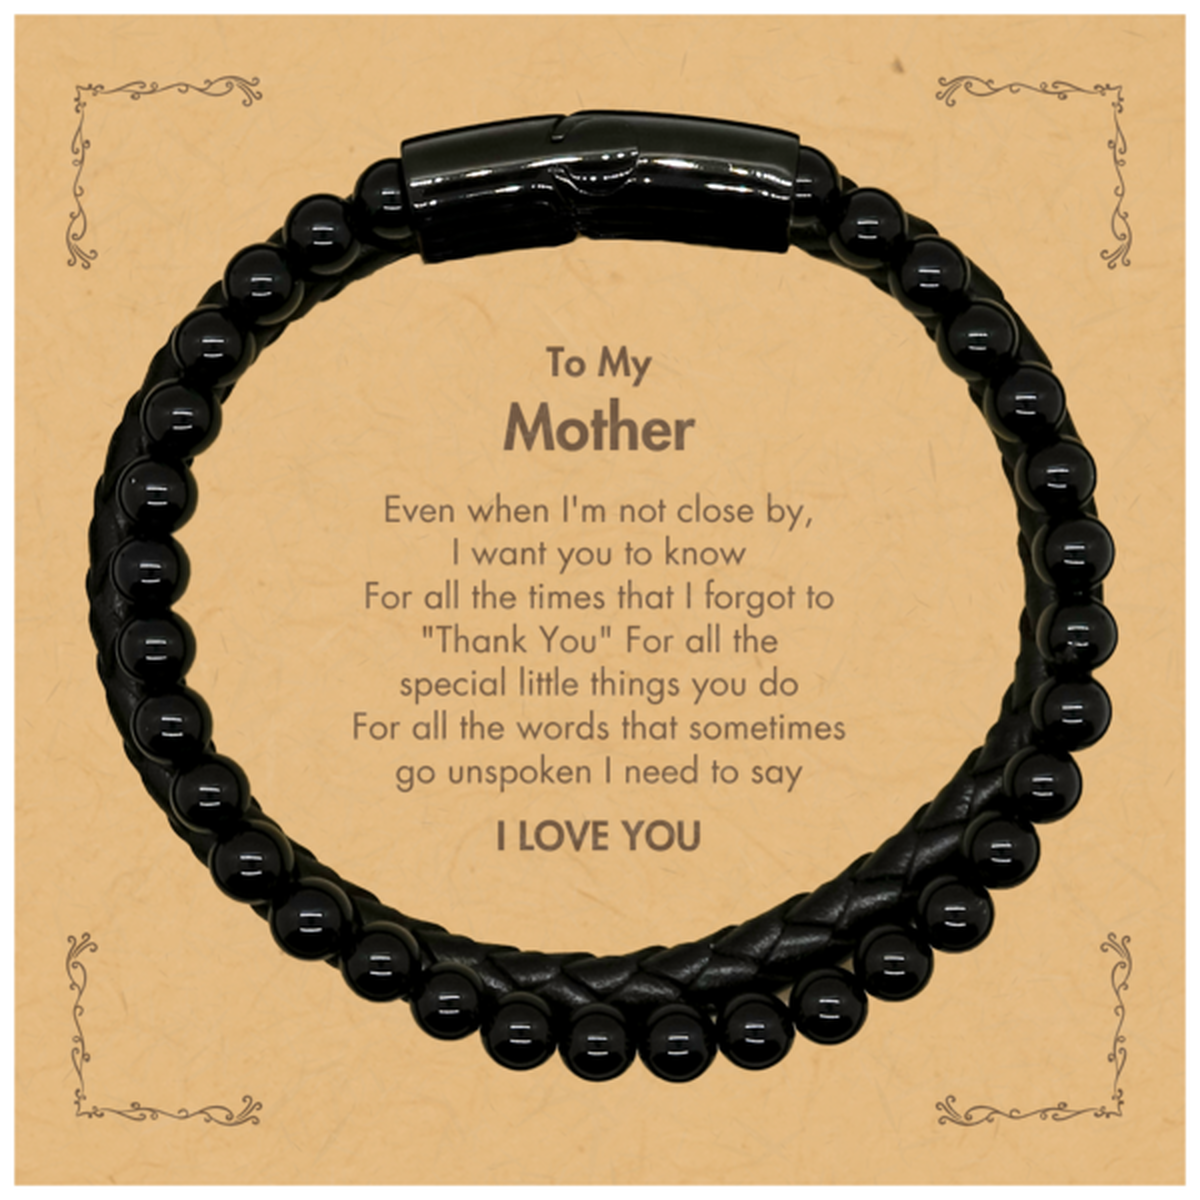 Thank You Gifts for Mother, Keepsake Stone Leather Bracelets Gifts for Mother Birthday Mother's day Father's Day Mother For all the words That sometimes go unspoken I need to say I LOVE YOU